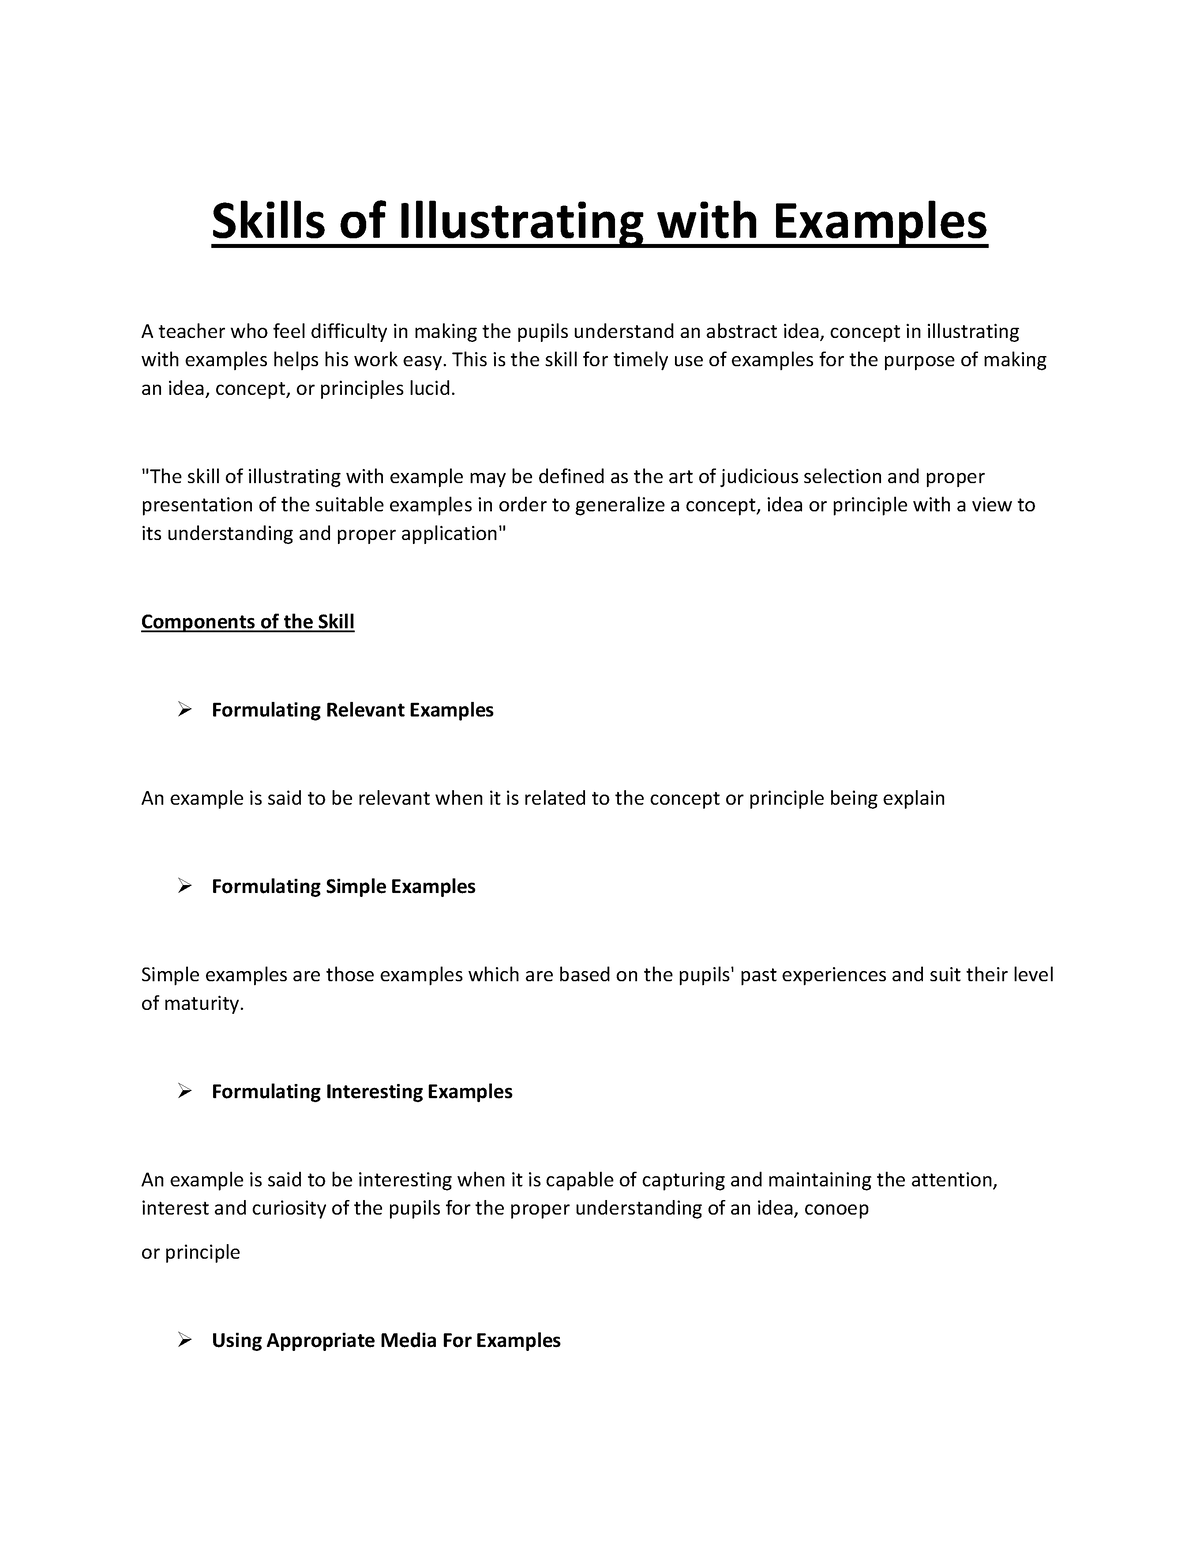 skill of illustrating with examples